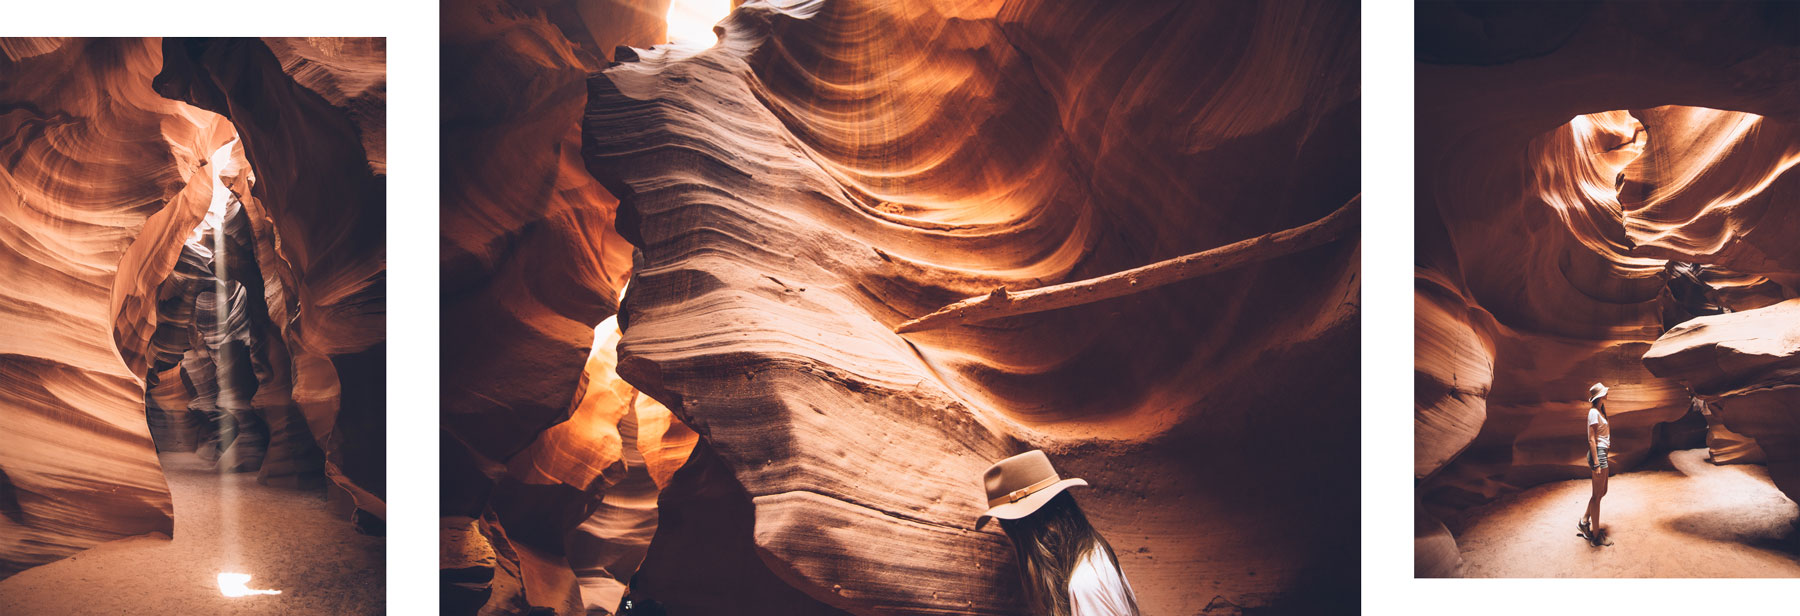 Upper Antelope Canyon, Page